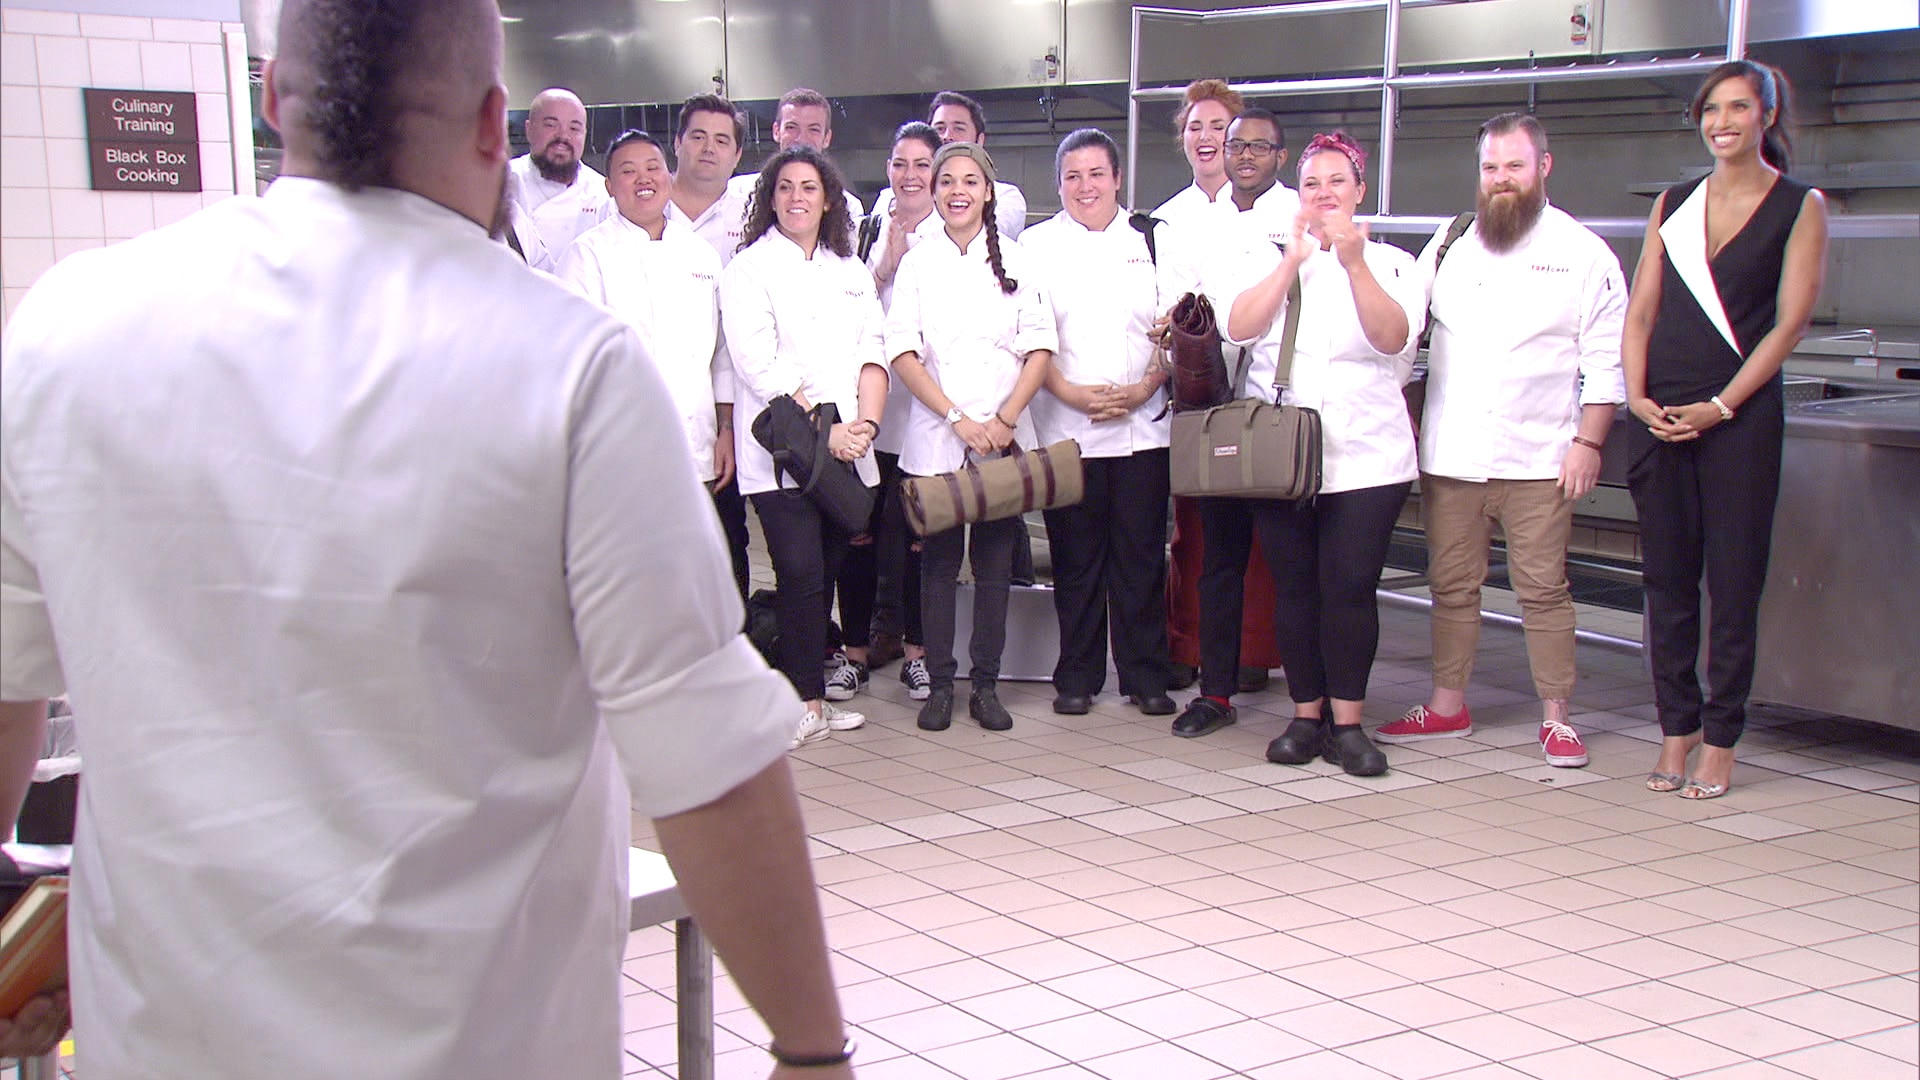 Watch The Final Top Chef Challenge! Top Chef Season 13 Episode 15 Video